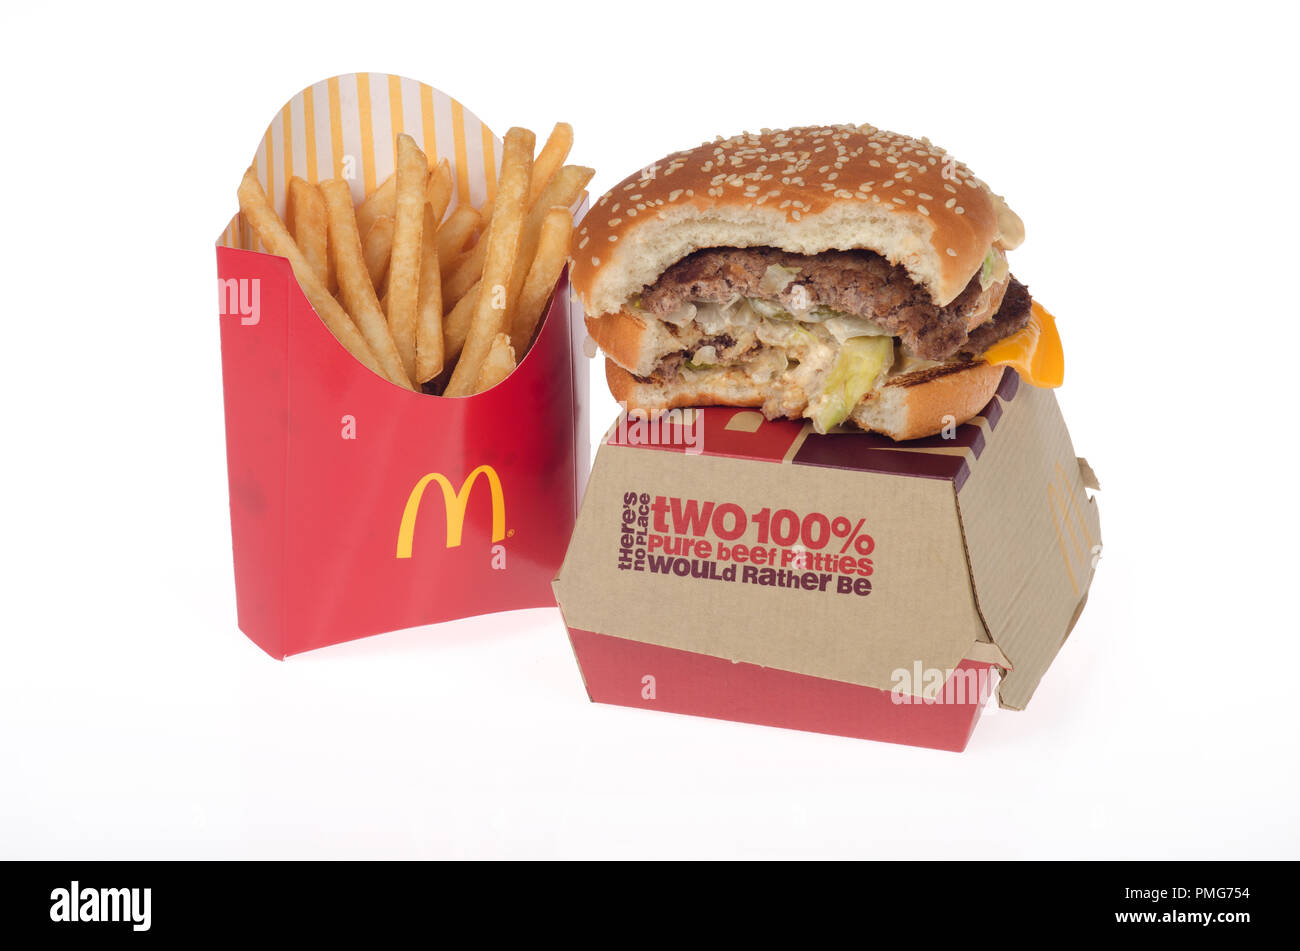 McDonald’s Big Mac with a bite taken out on top of box with french fries or chips Stock Photo